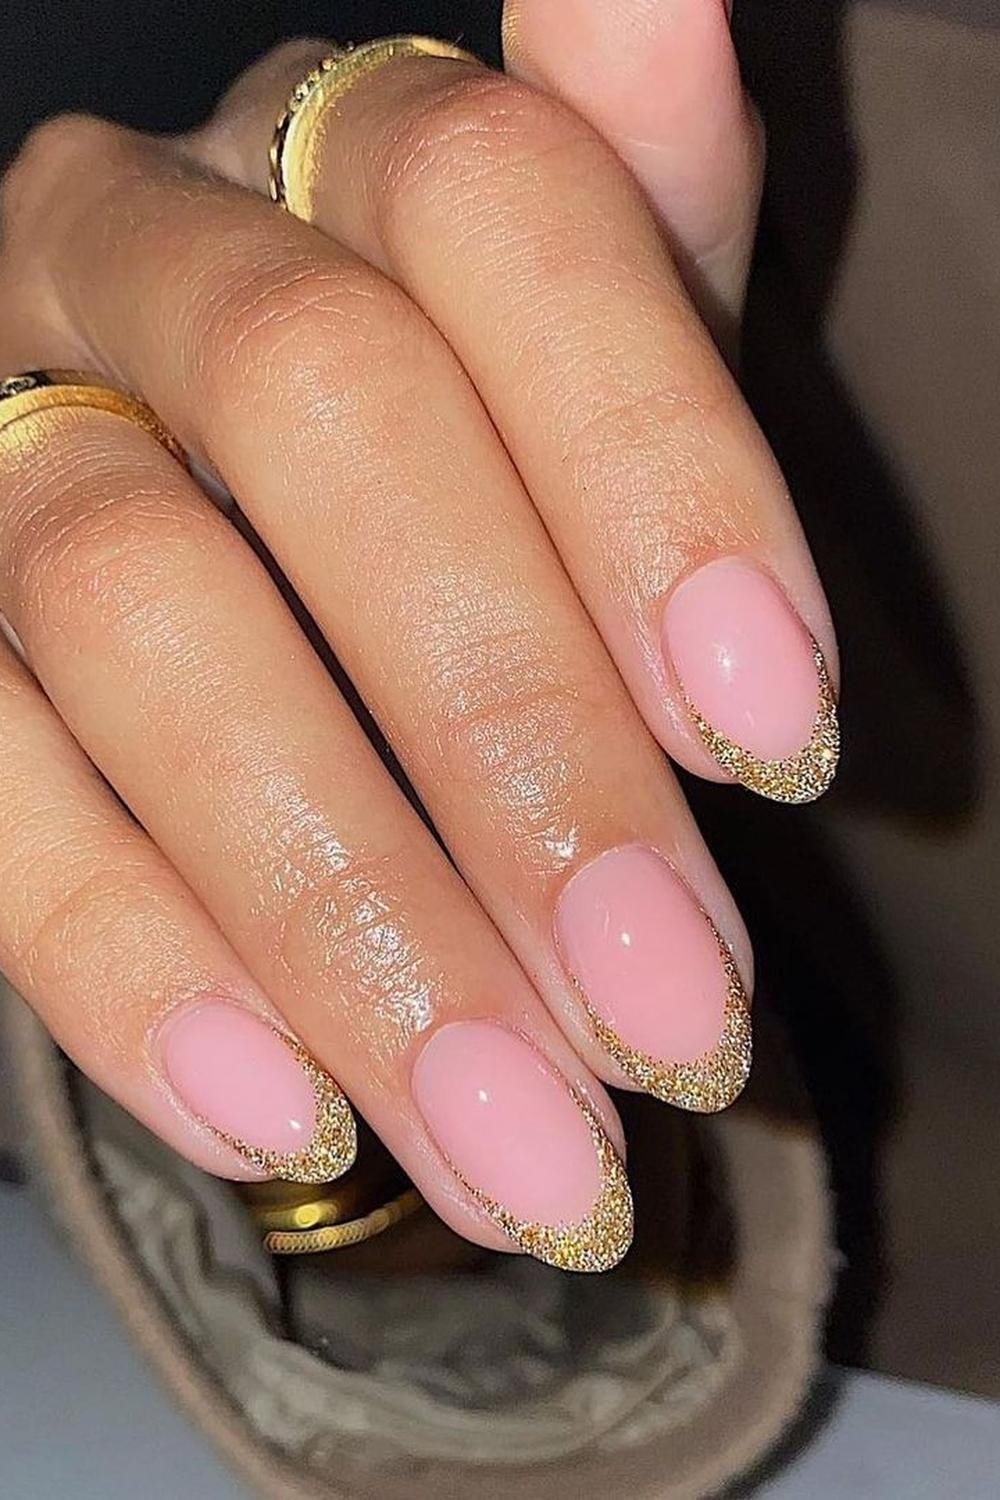 14 - Picture of Glitter French Tip Nails